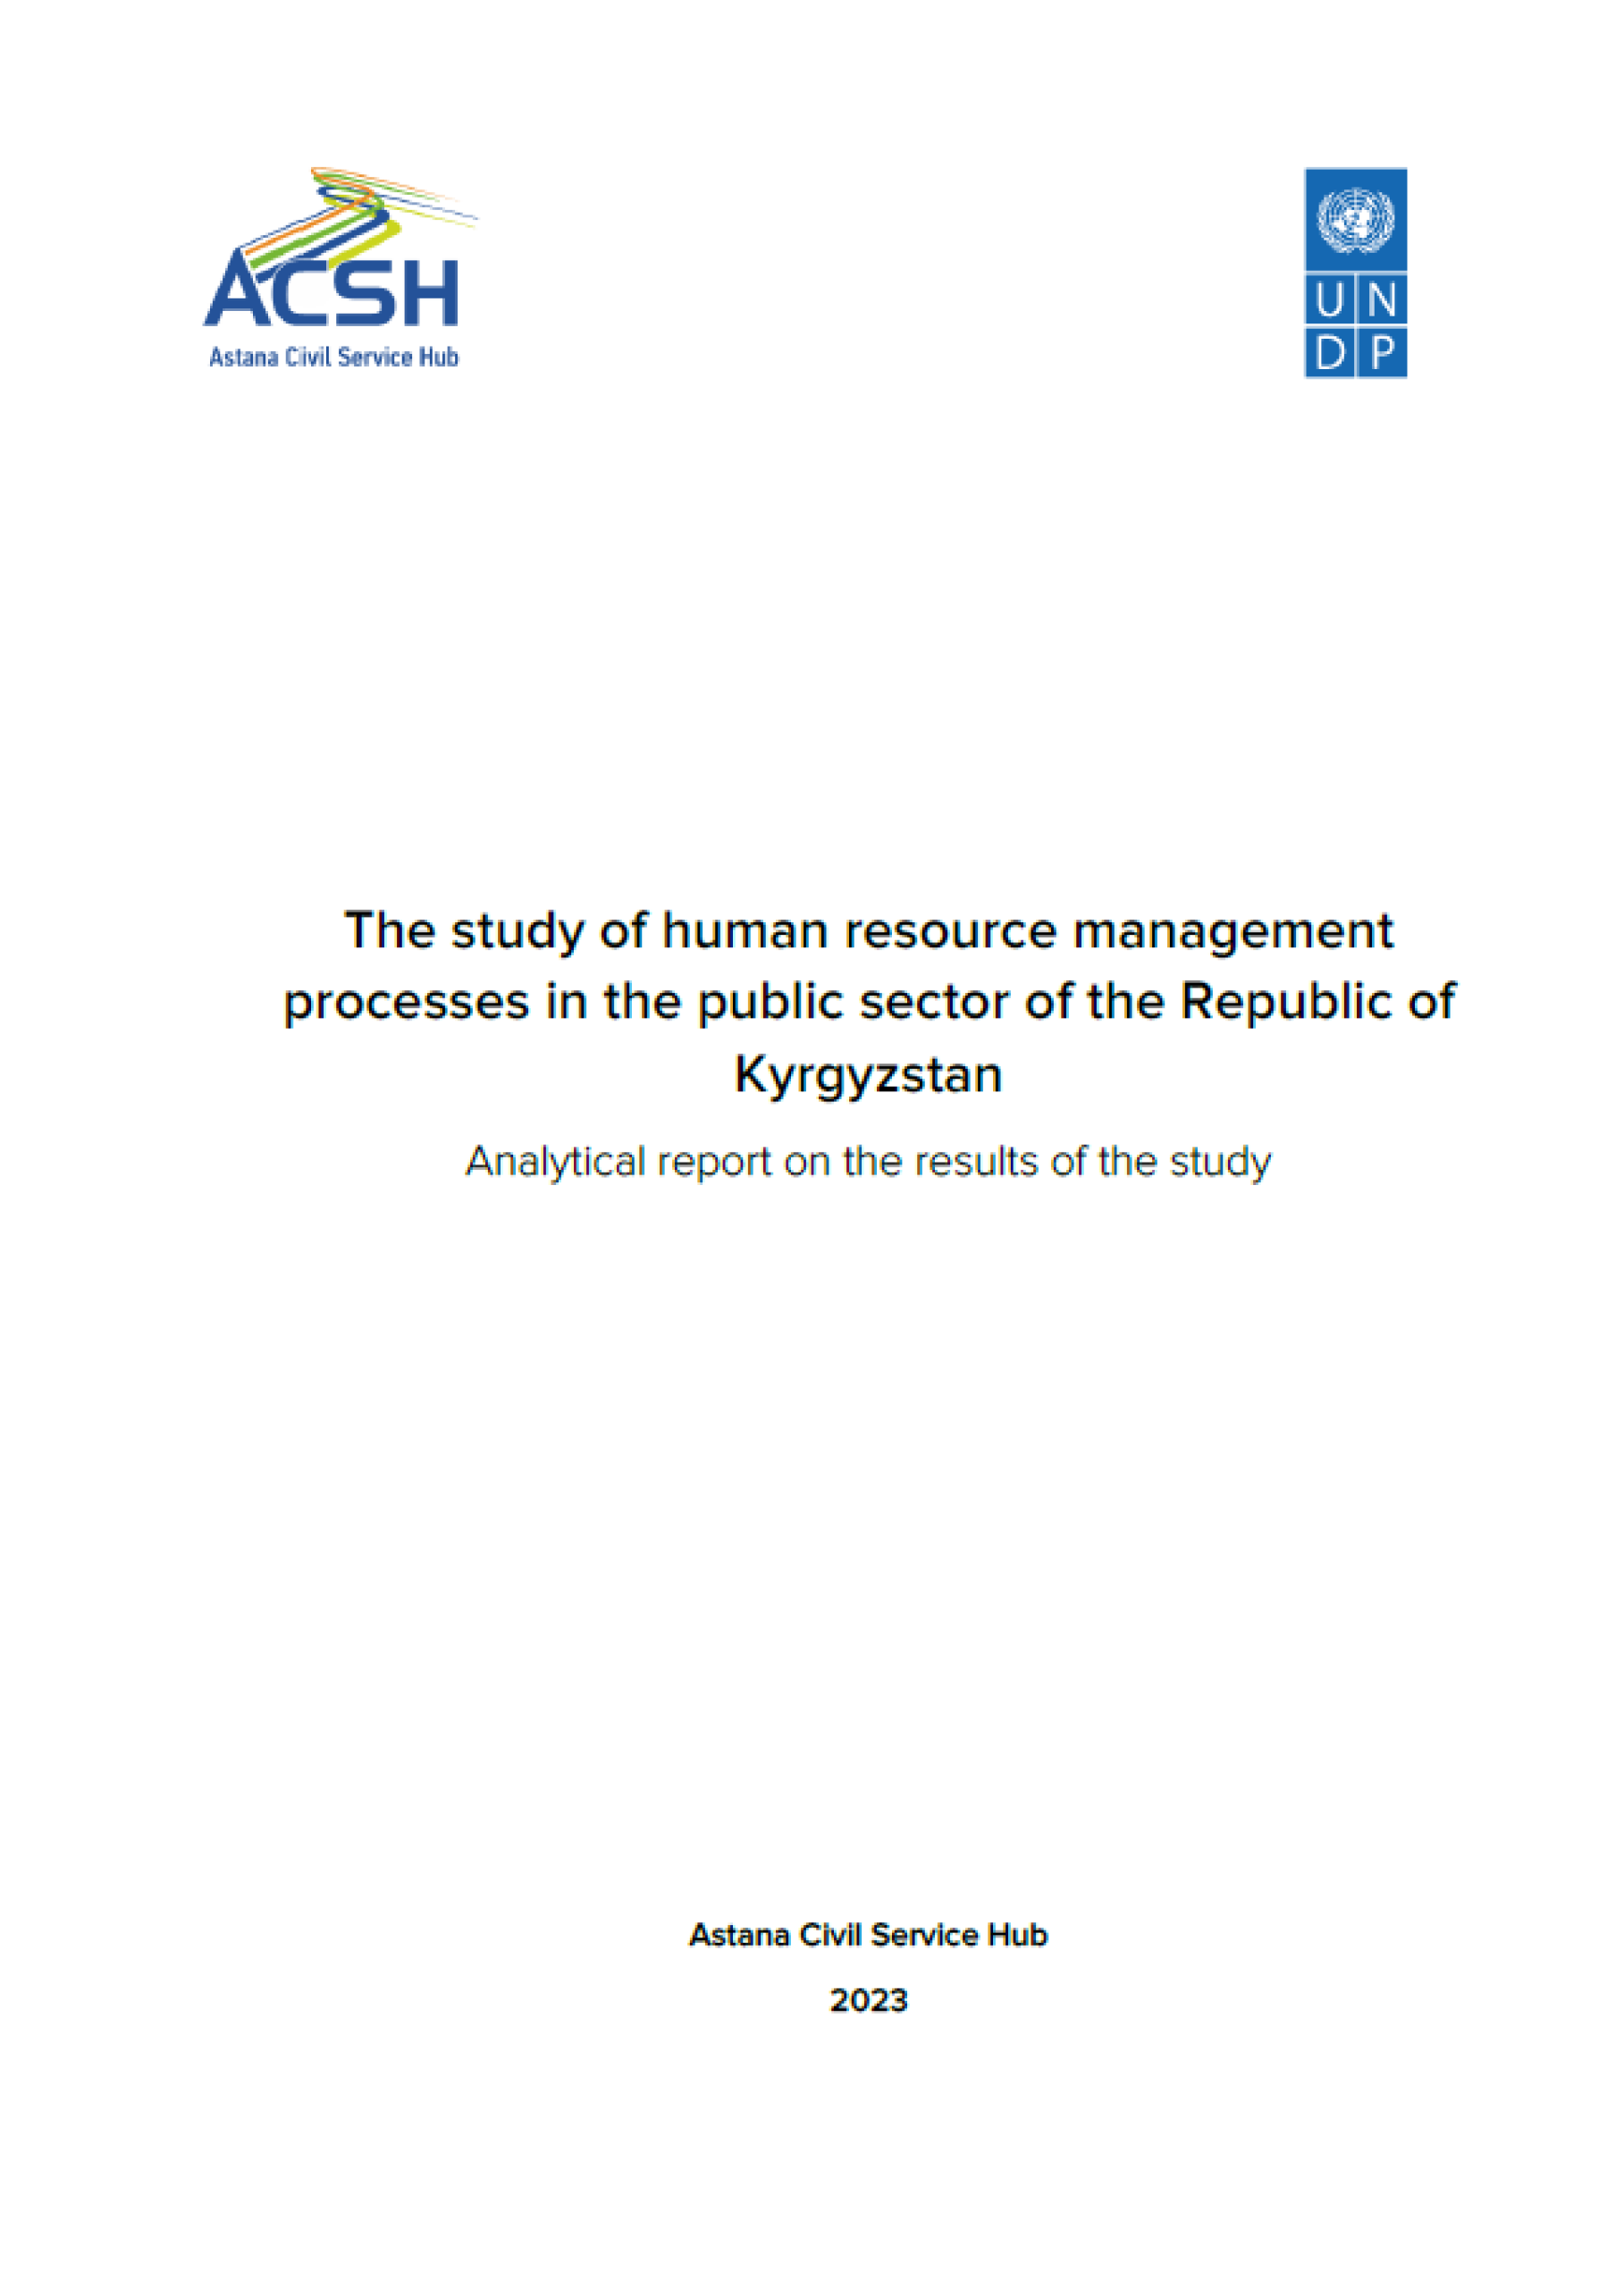 The study of human resource management processes in the public sector of the Republic of Kyrgyzstan